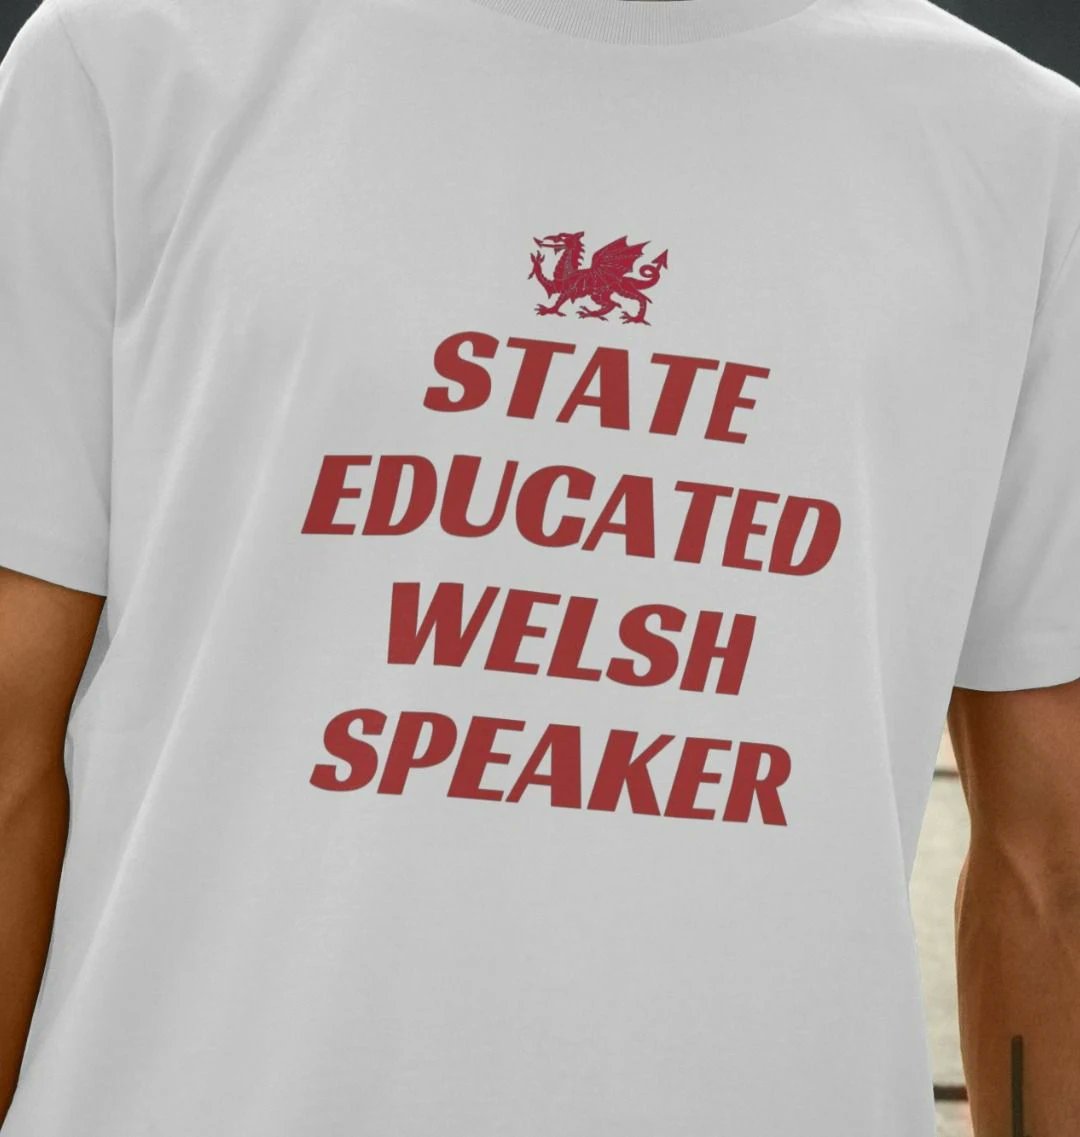 For all the state educated Welsh speakers!
fforddgaled.cymru/product/beeber/
#Annibyniaeth #StateEducatedWelshSpeaker